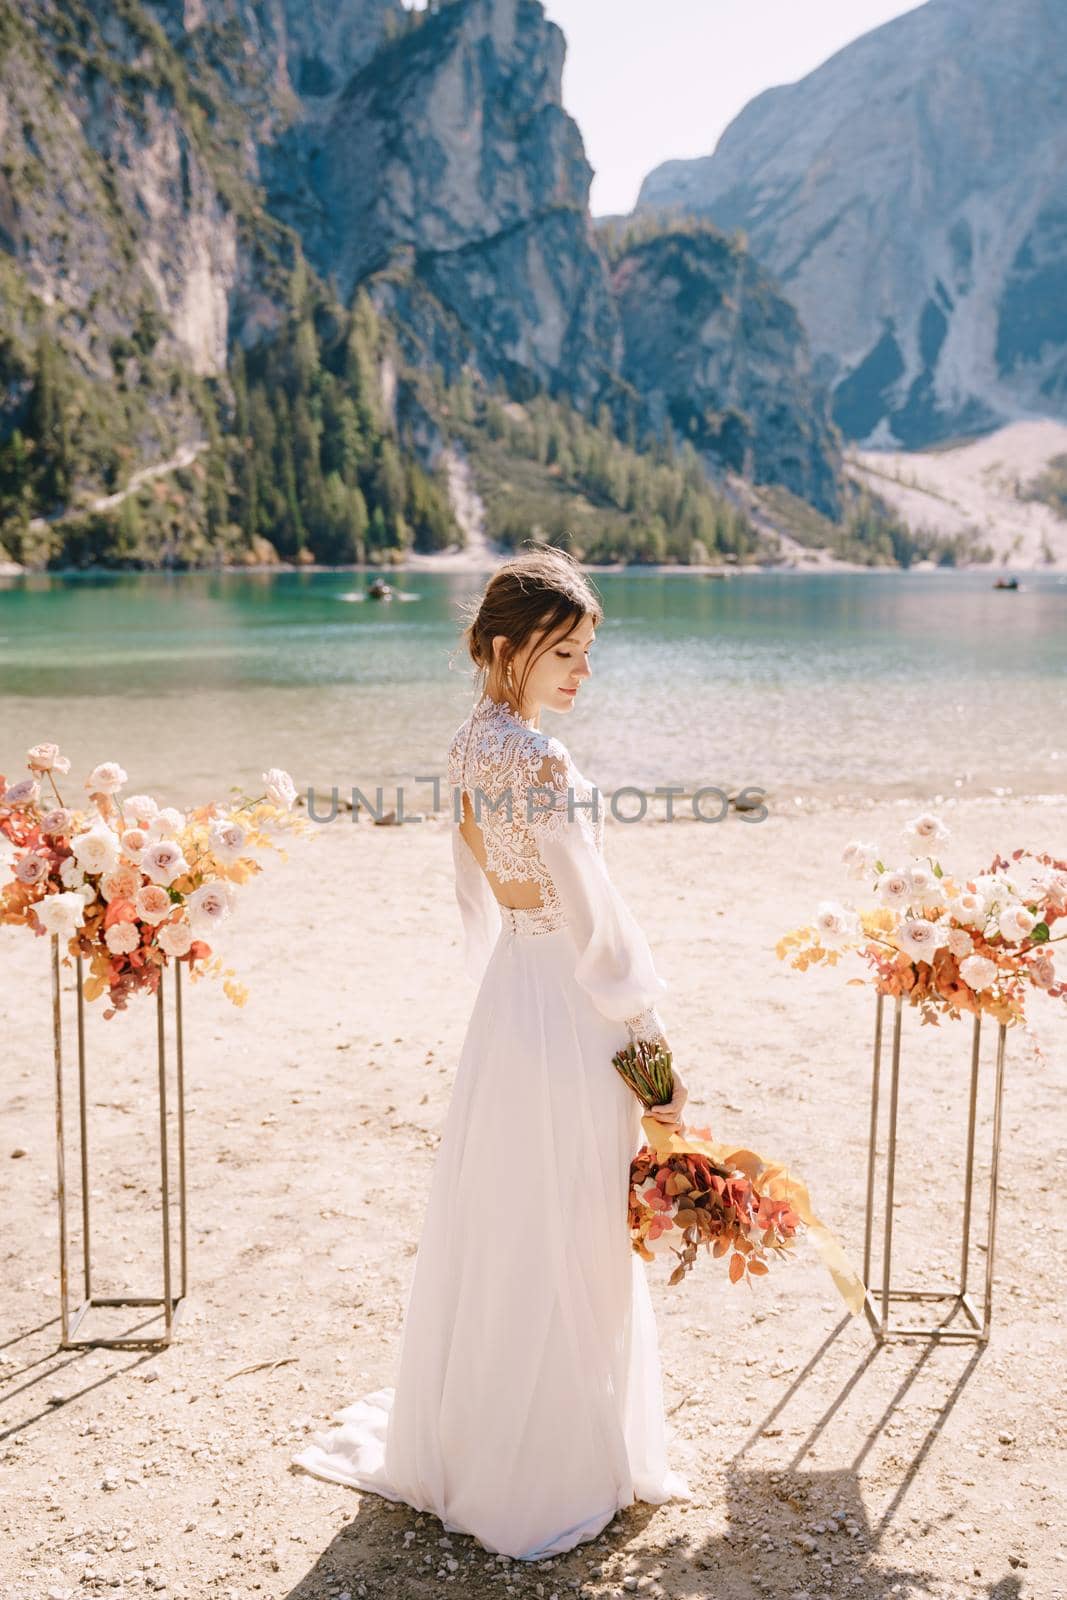 Beautiful bride in a white dress with sleeves and lace, with a yellow autumn bouquet on background of the arch for ceremony, at Lago di Braies in Italy. Destination wedding in Europe, on Braies lake. by Nadtochiy